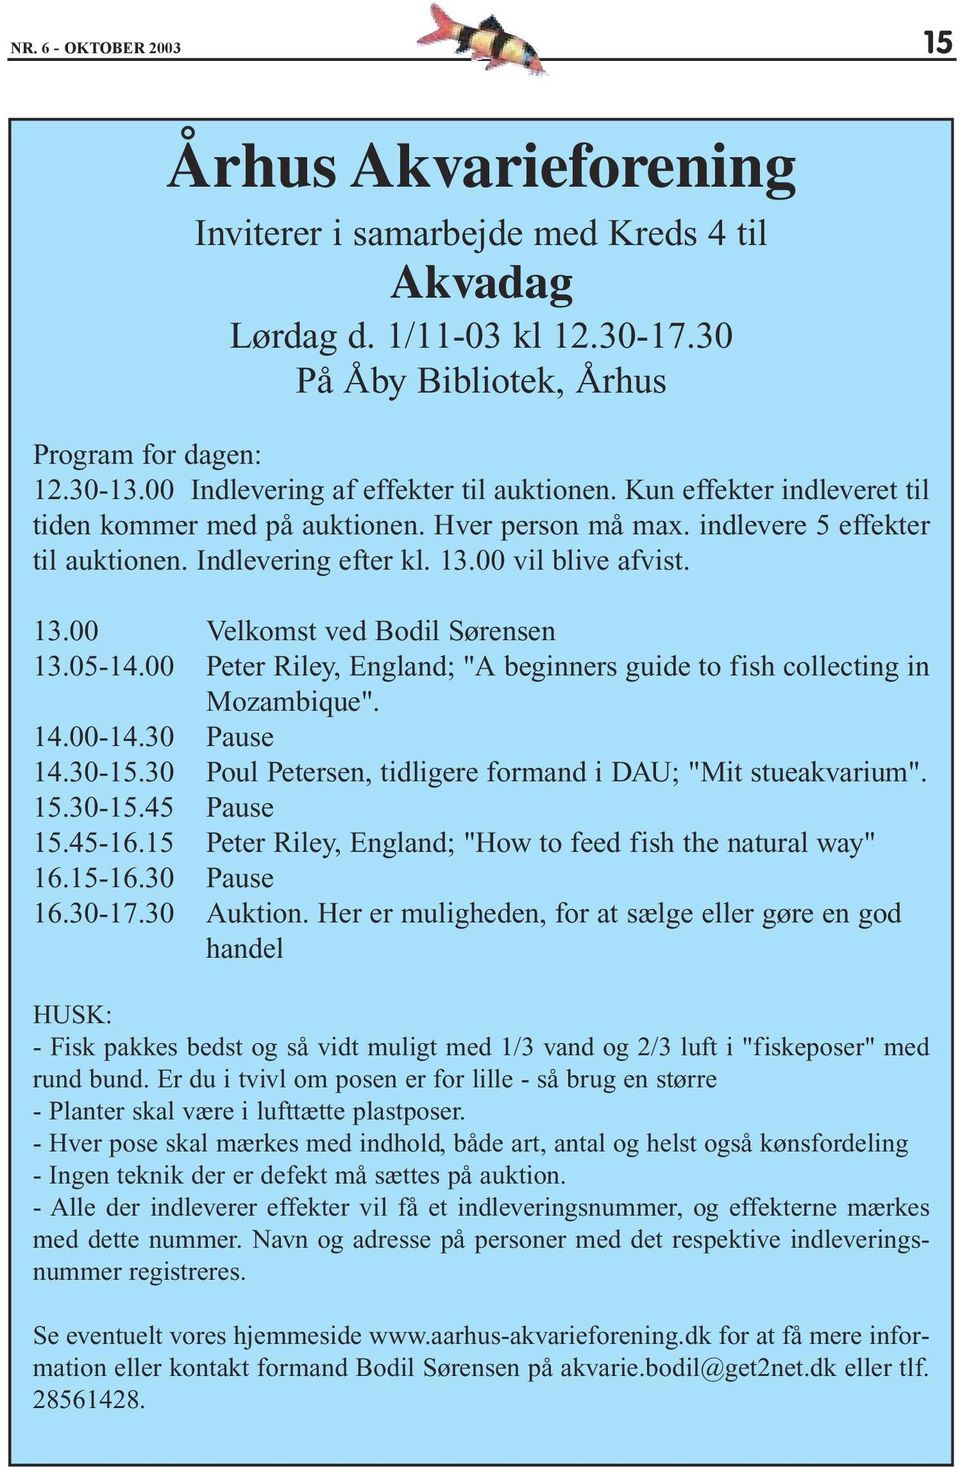 00 vil blive afvist. 13.00 Velkomst ved Bodil Sørensen 13.05-14.00 Peter Riley, England; "A beginners guide to fish collecting in Mozambique". 14.00-14.30 Pause 14.30-15.